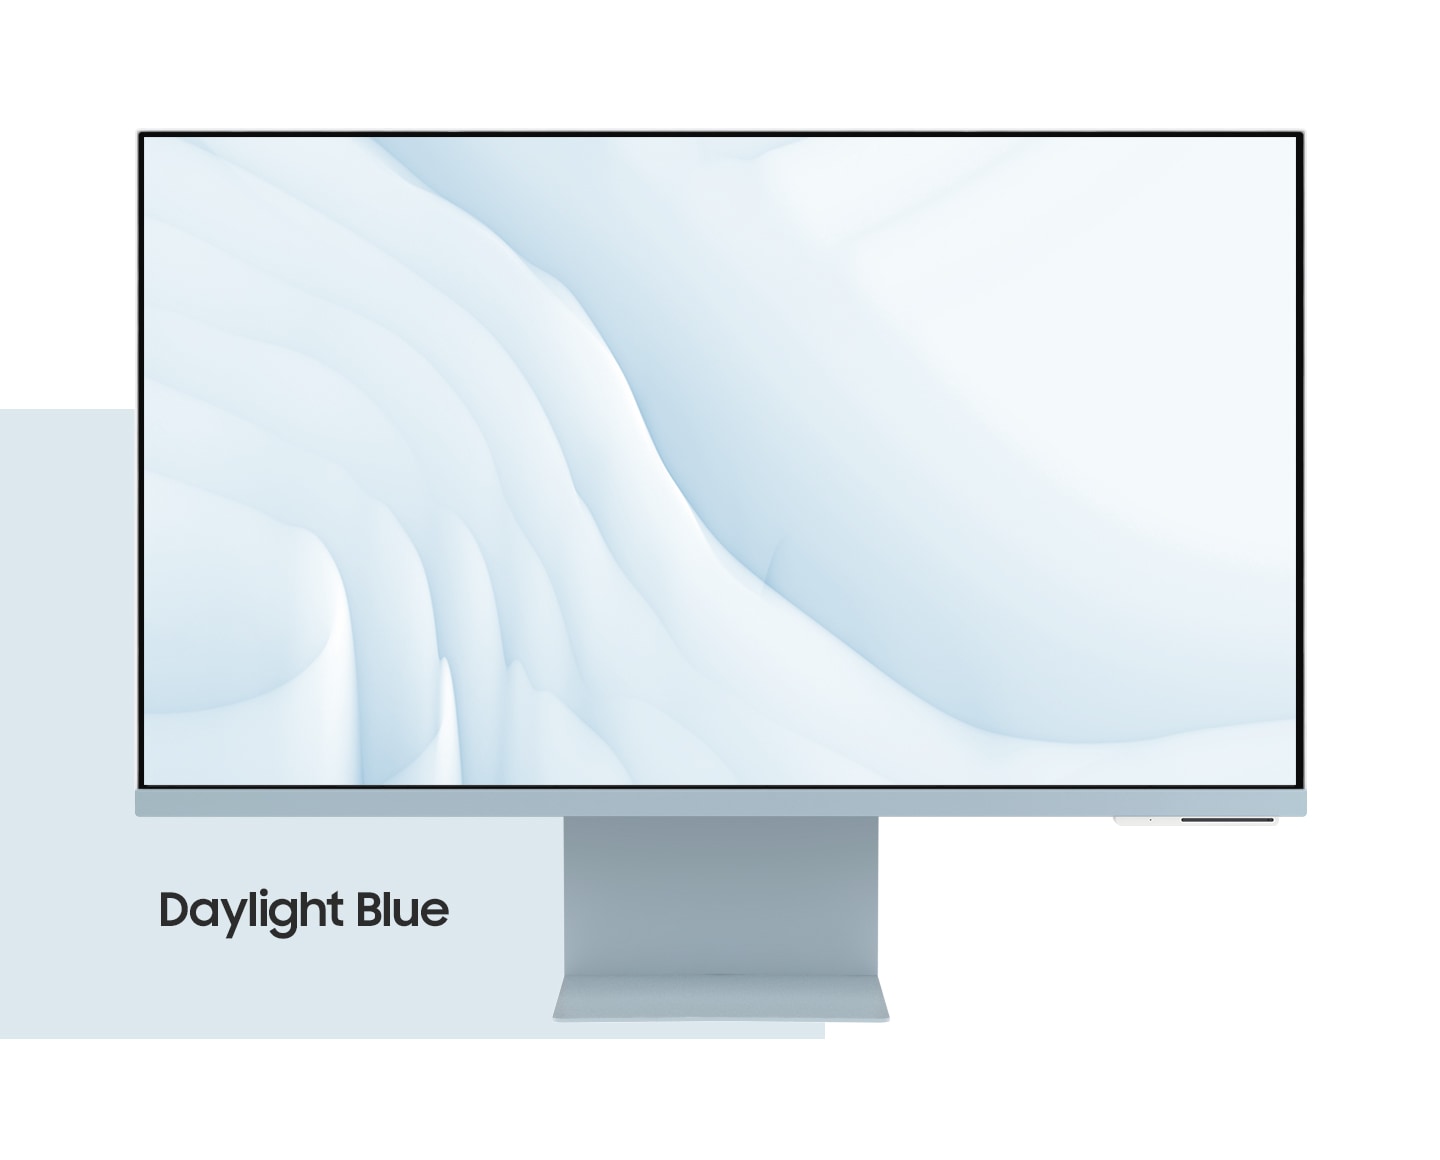 There are four monitors in a row. And as the monitors merge into one, the color changes, and each color name appears sequentially at the bottom - warm white, spring green, sunset pink, and daylight blue.